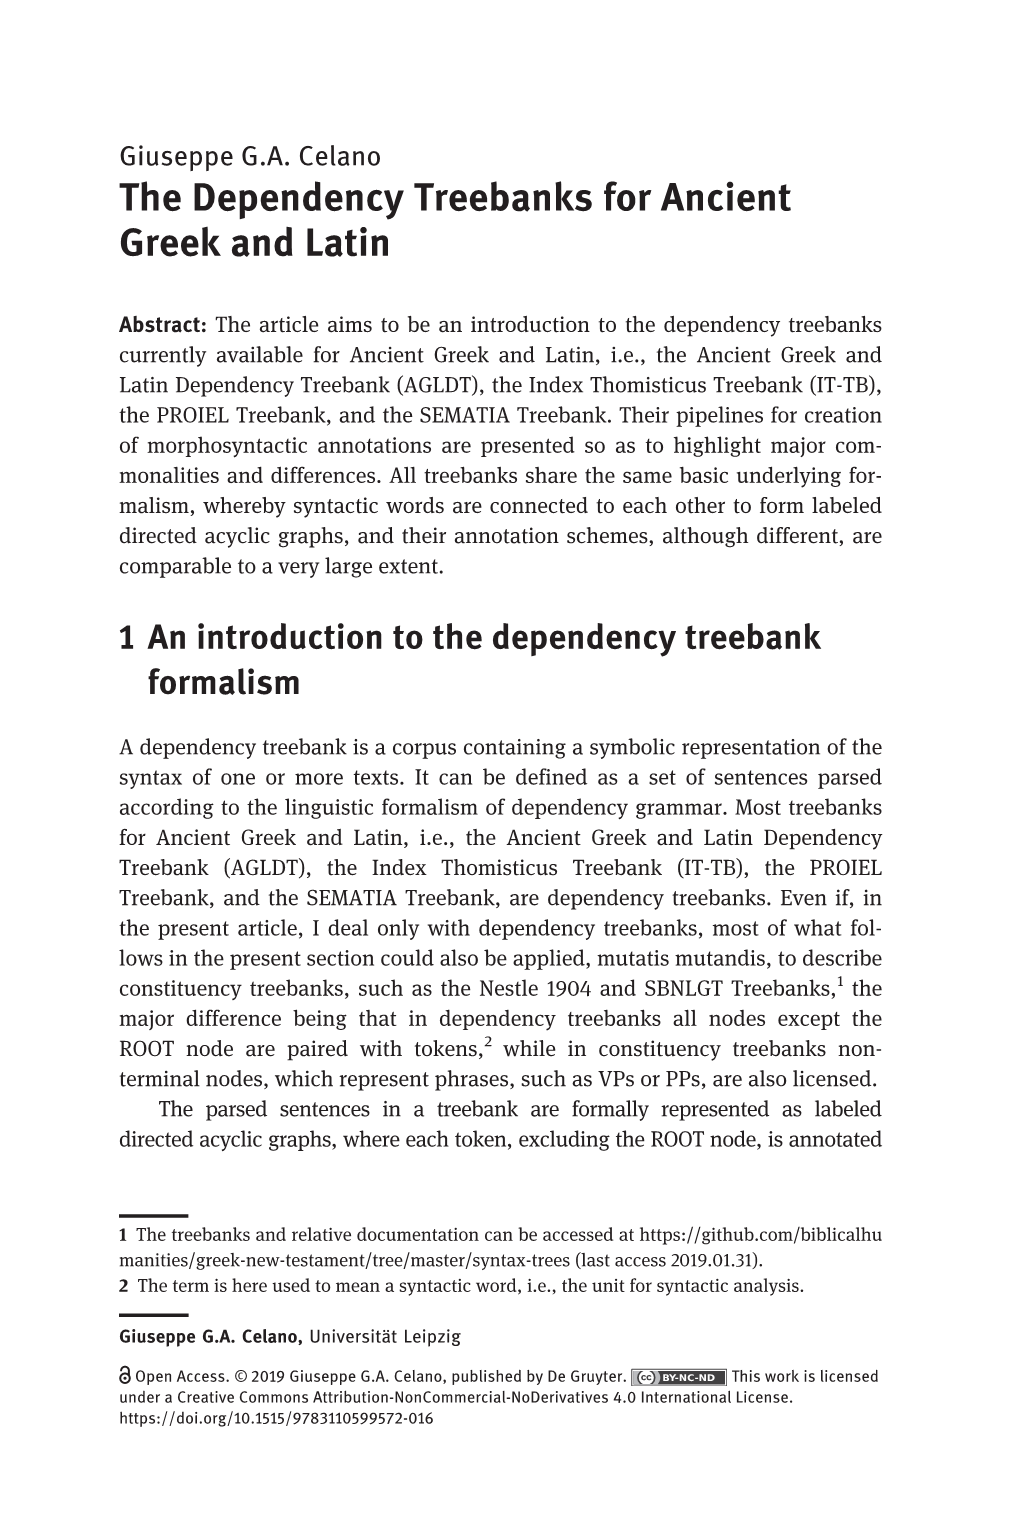 The Dependency Treebanks for Ancient Greek and Latin